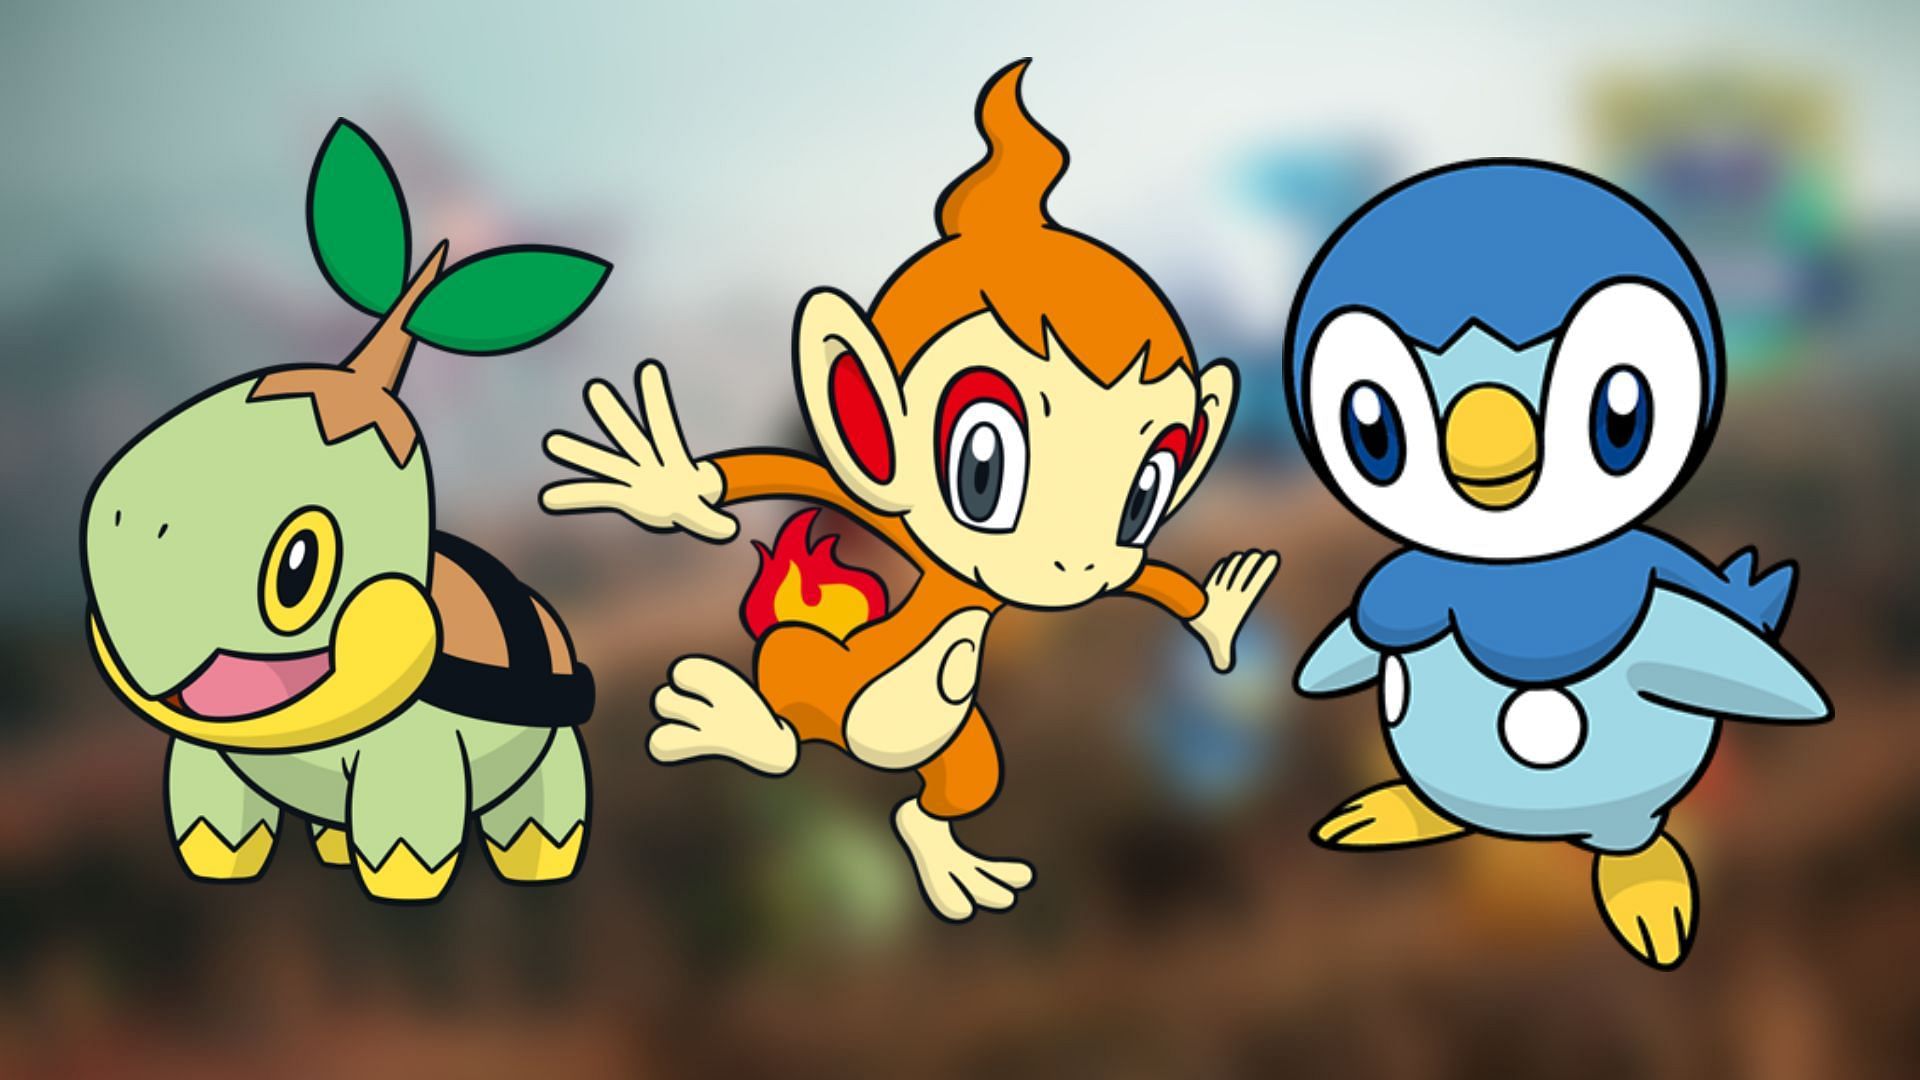 &quot;Those Sinnoh starters are a menace&quot;: Pokemon GO Road to Sinnoh leaves players frustrated